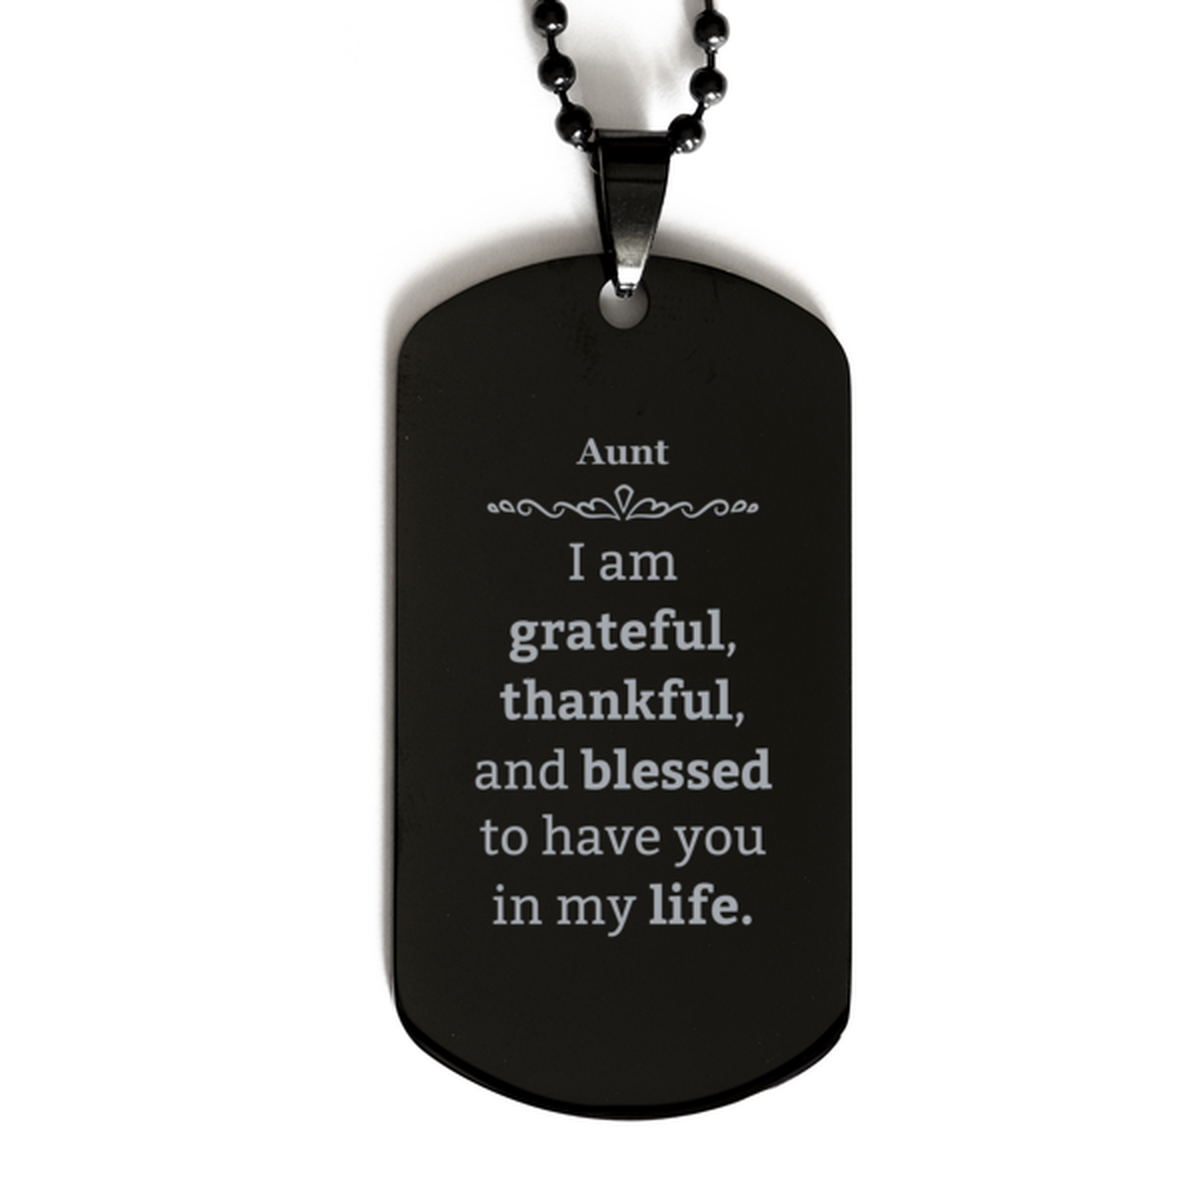 Aunt Appreciation Gifts, I am grateful, thankful, and blessed, Thank You Black Dog Tag for Aunt, Birthday Inspiration Gifts for Aunt